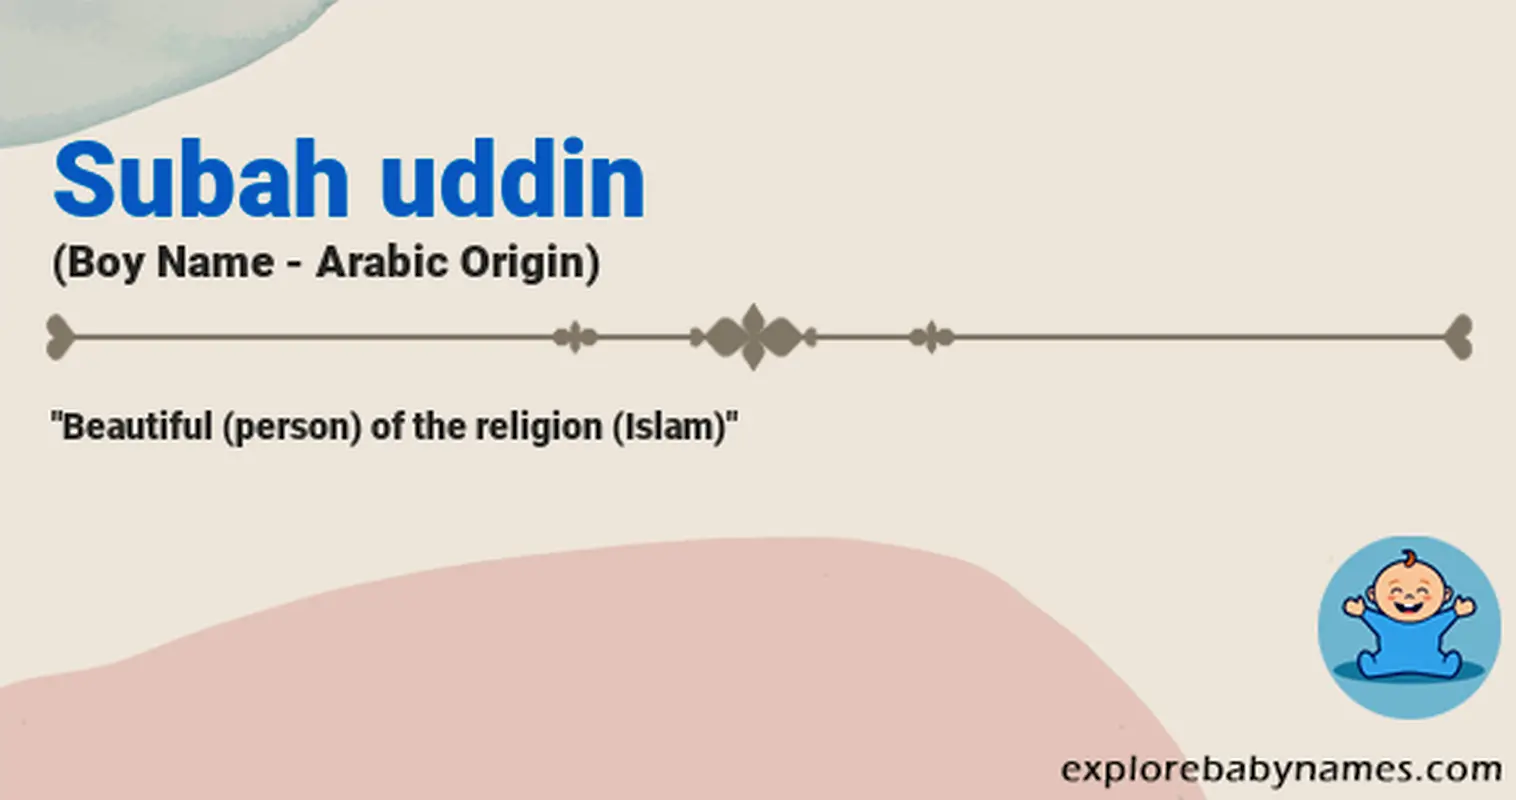 Meaning of Subah uddin